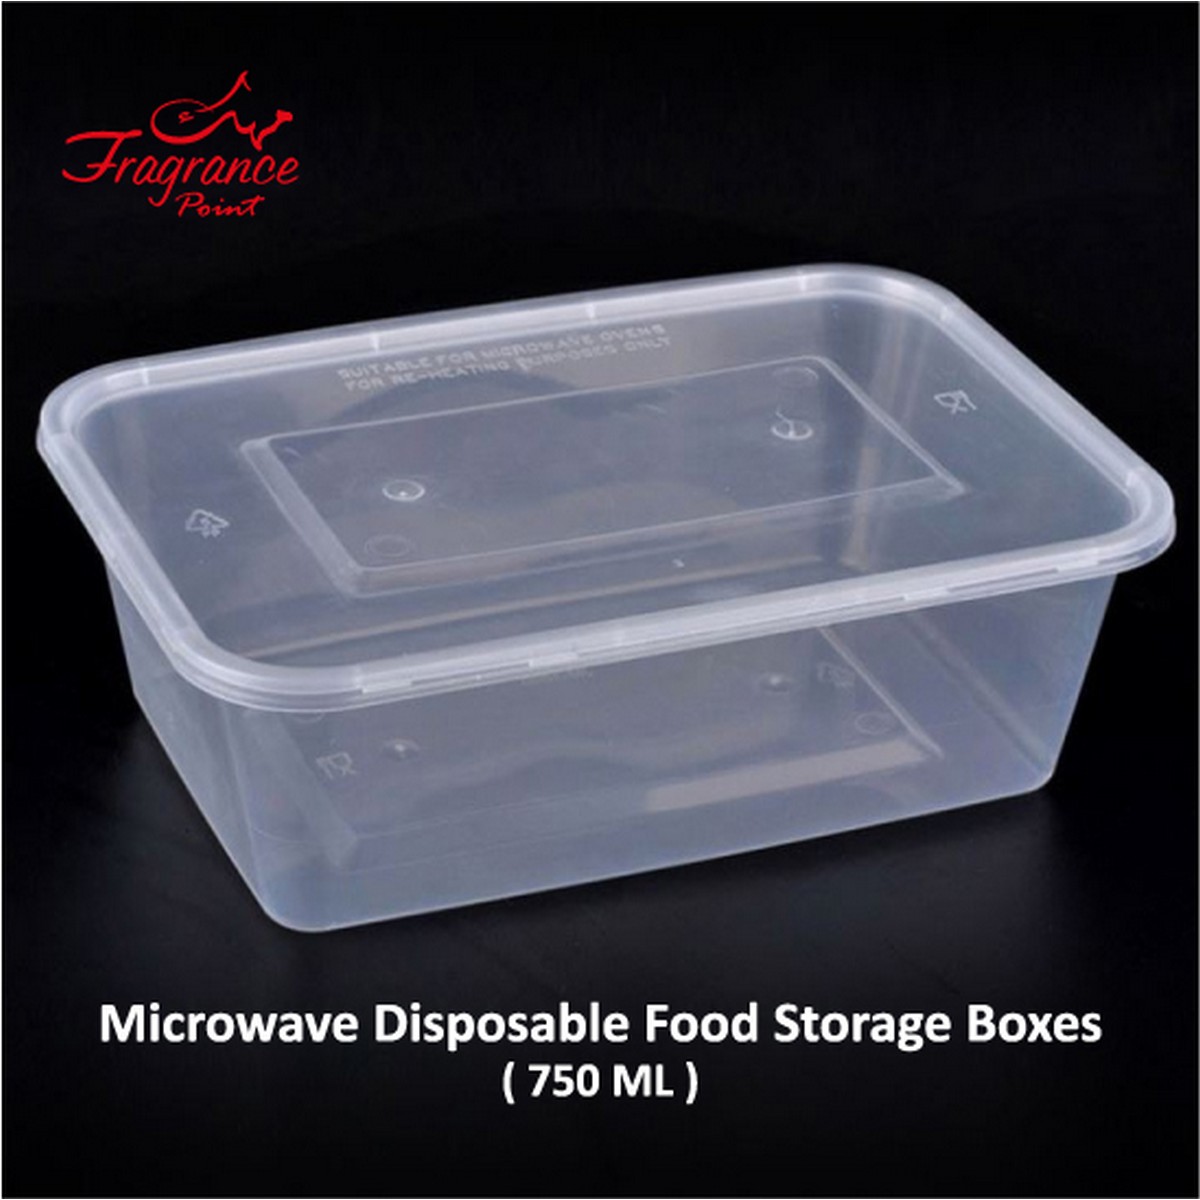 Pack of 20 - 750 ML. Microwave Disposable Food Storage Boxes